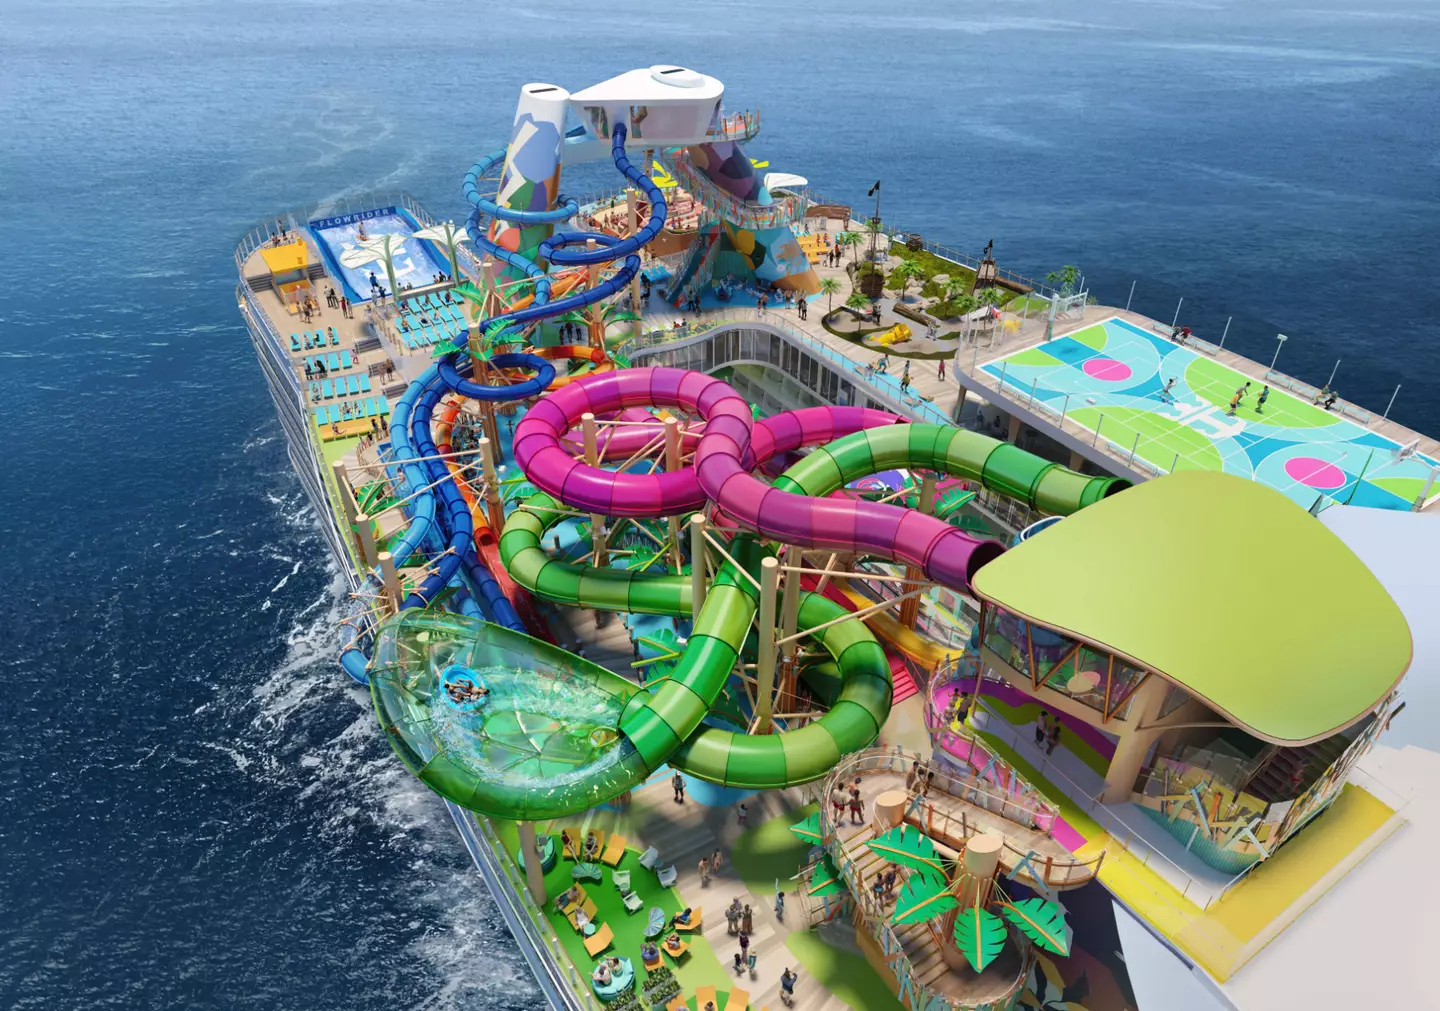 It boasts the world’s largest waterpark at sea.